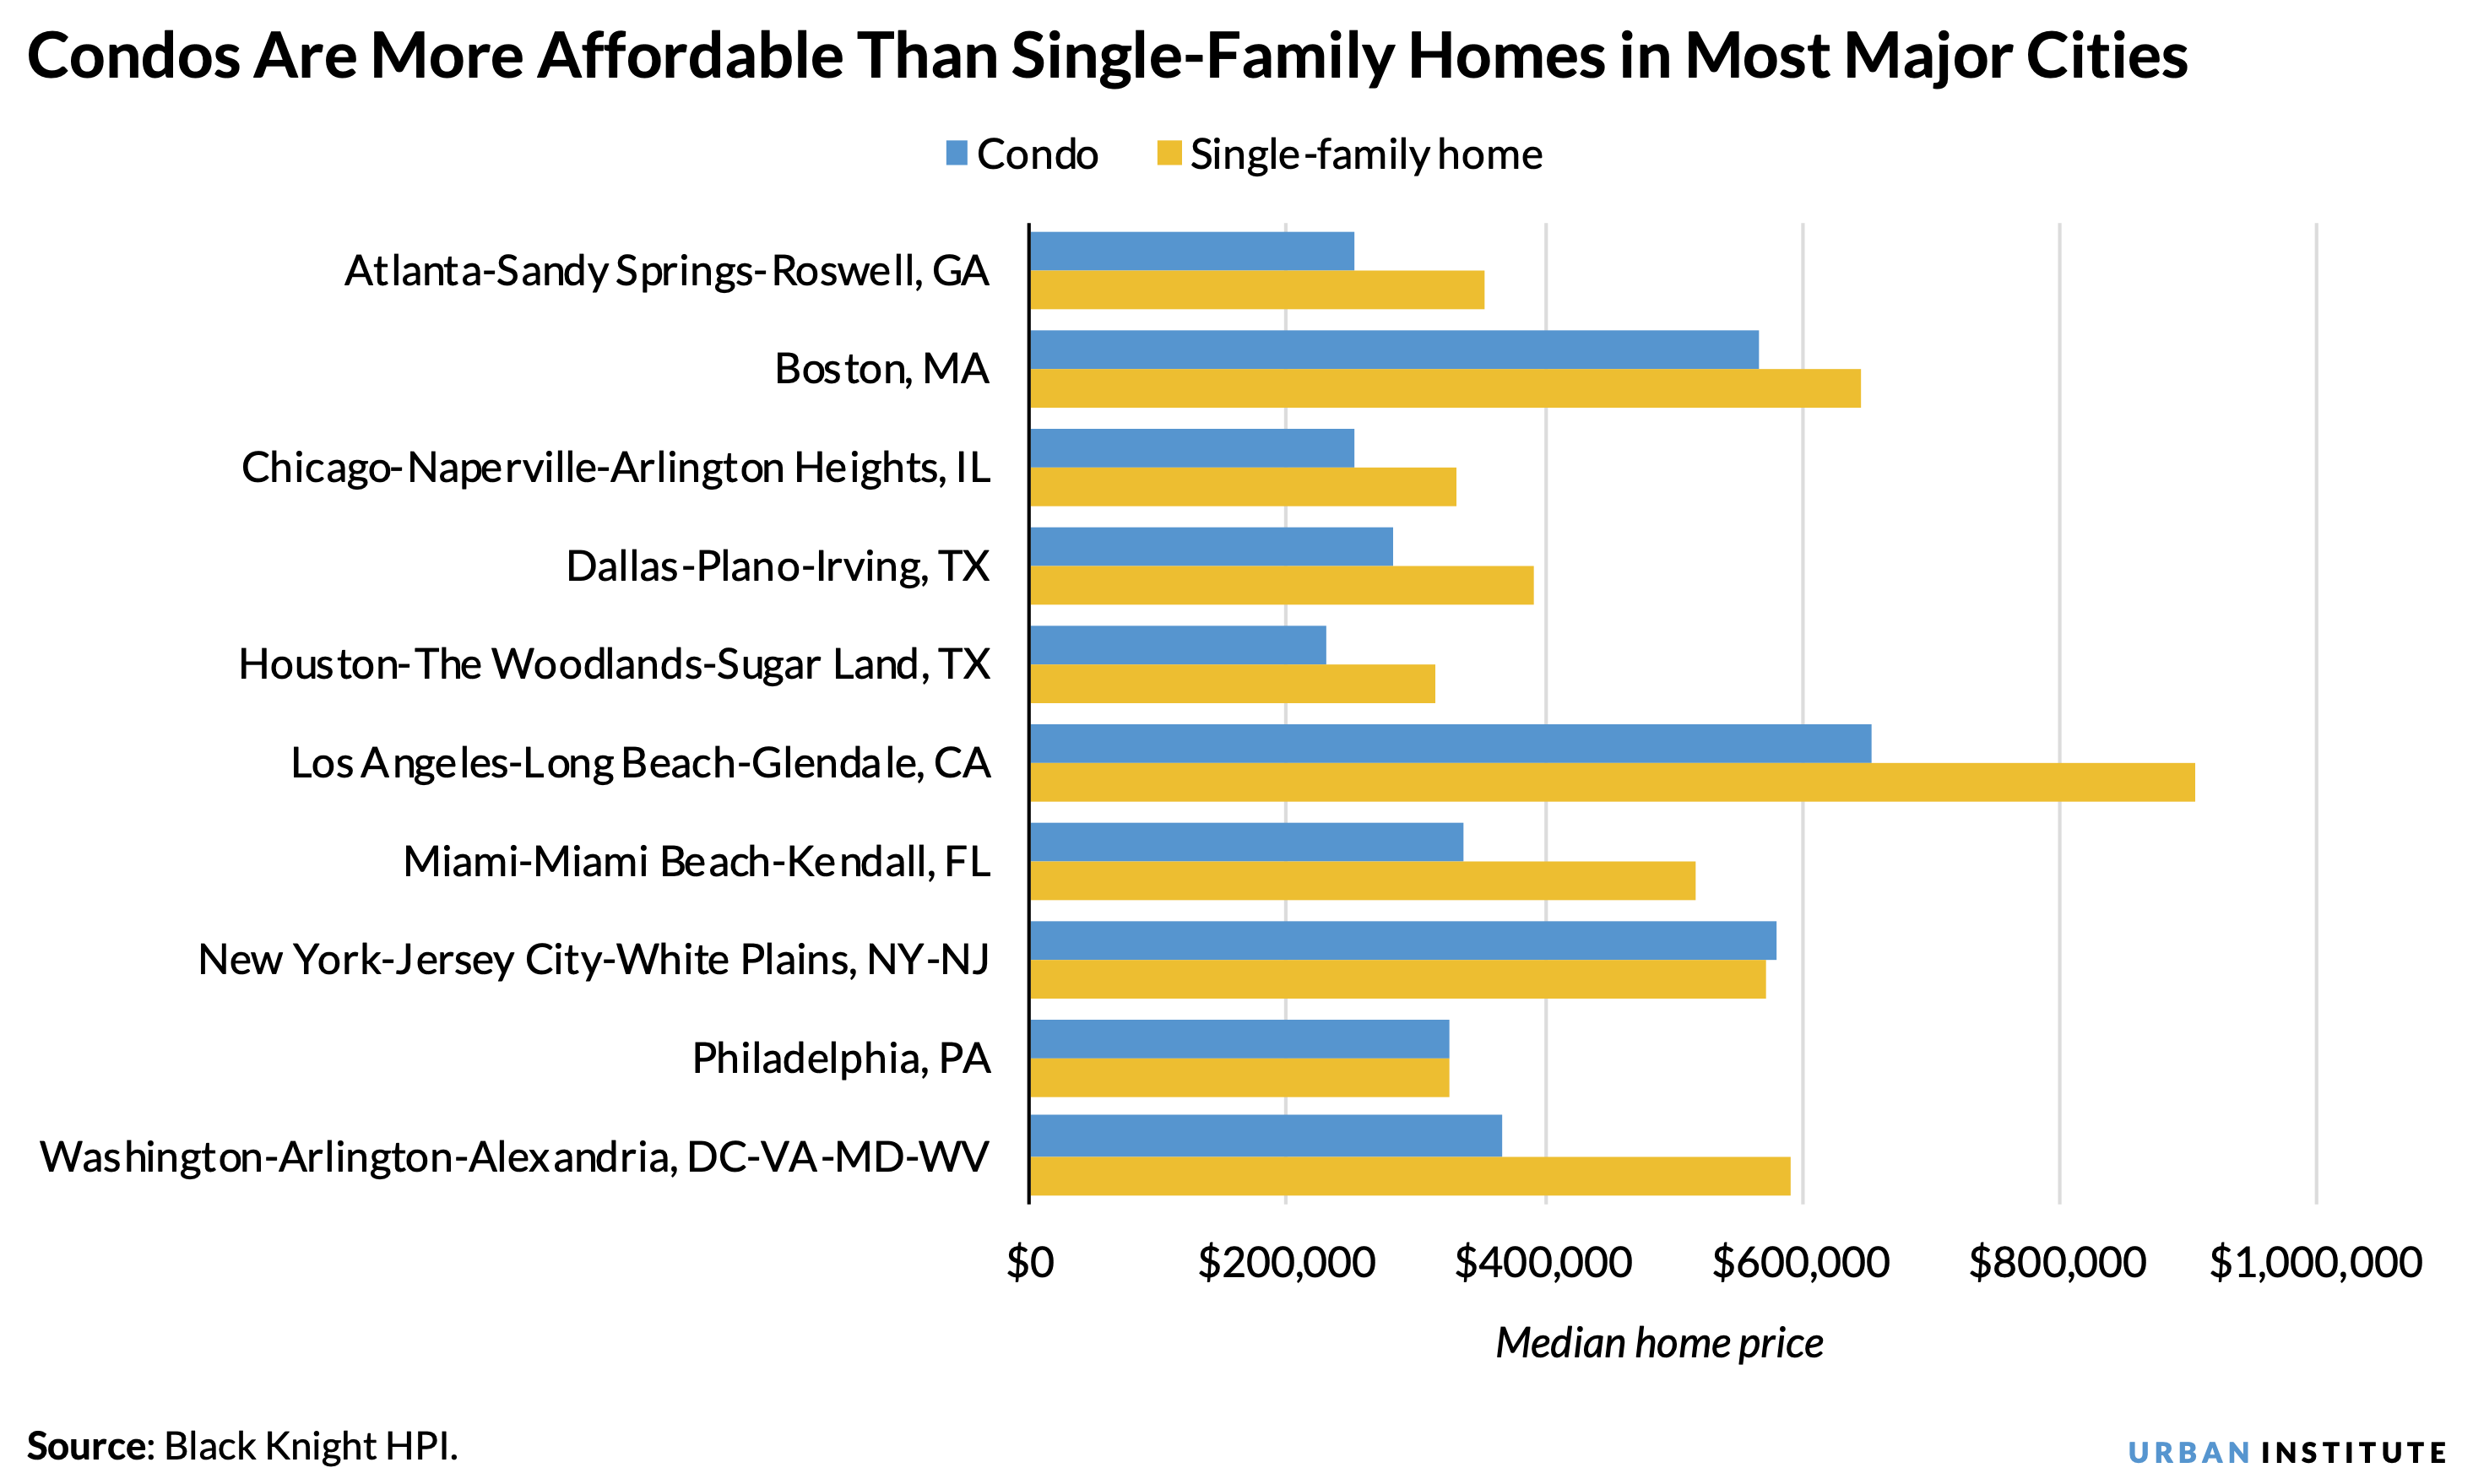 Bar chart showing that condos are more affordable than single-family homes in most major US cities